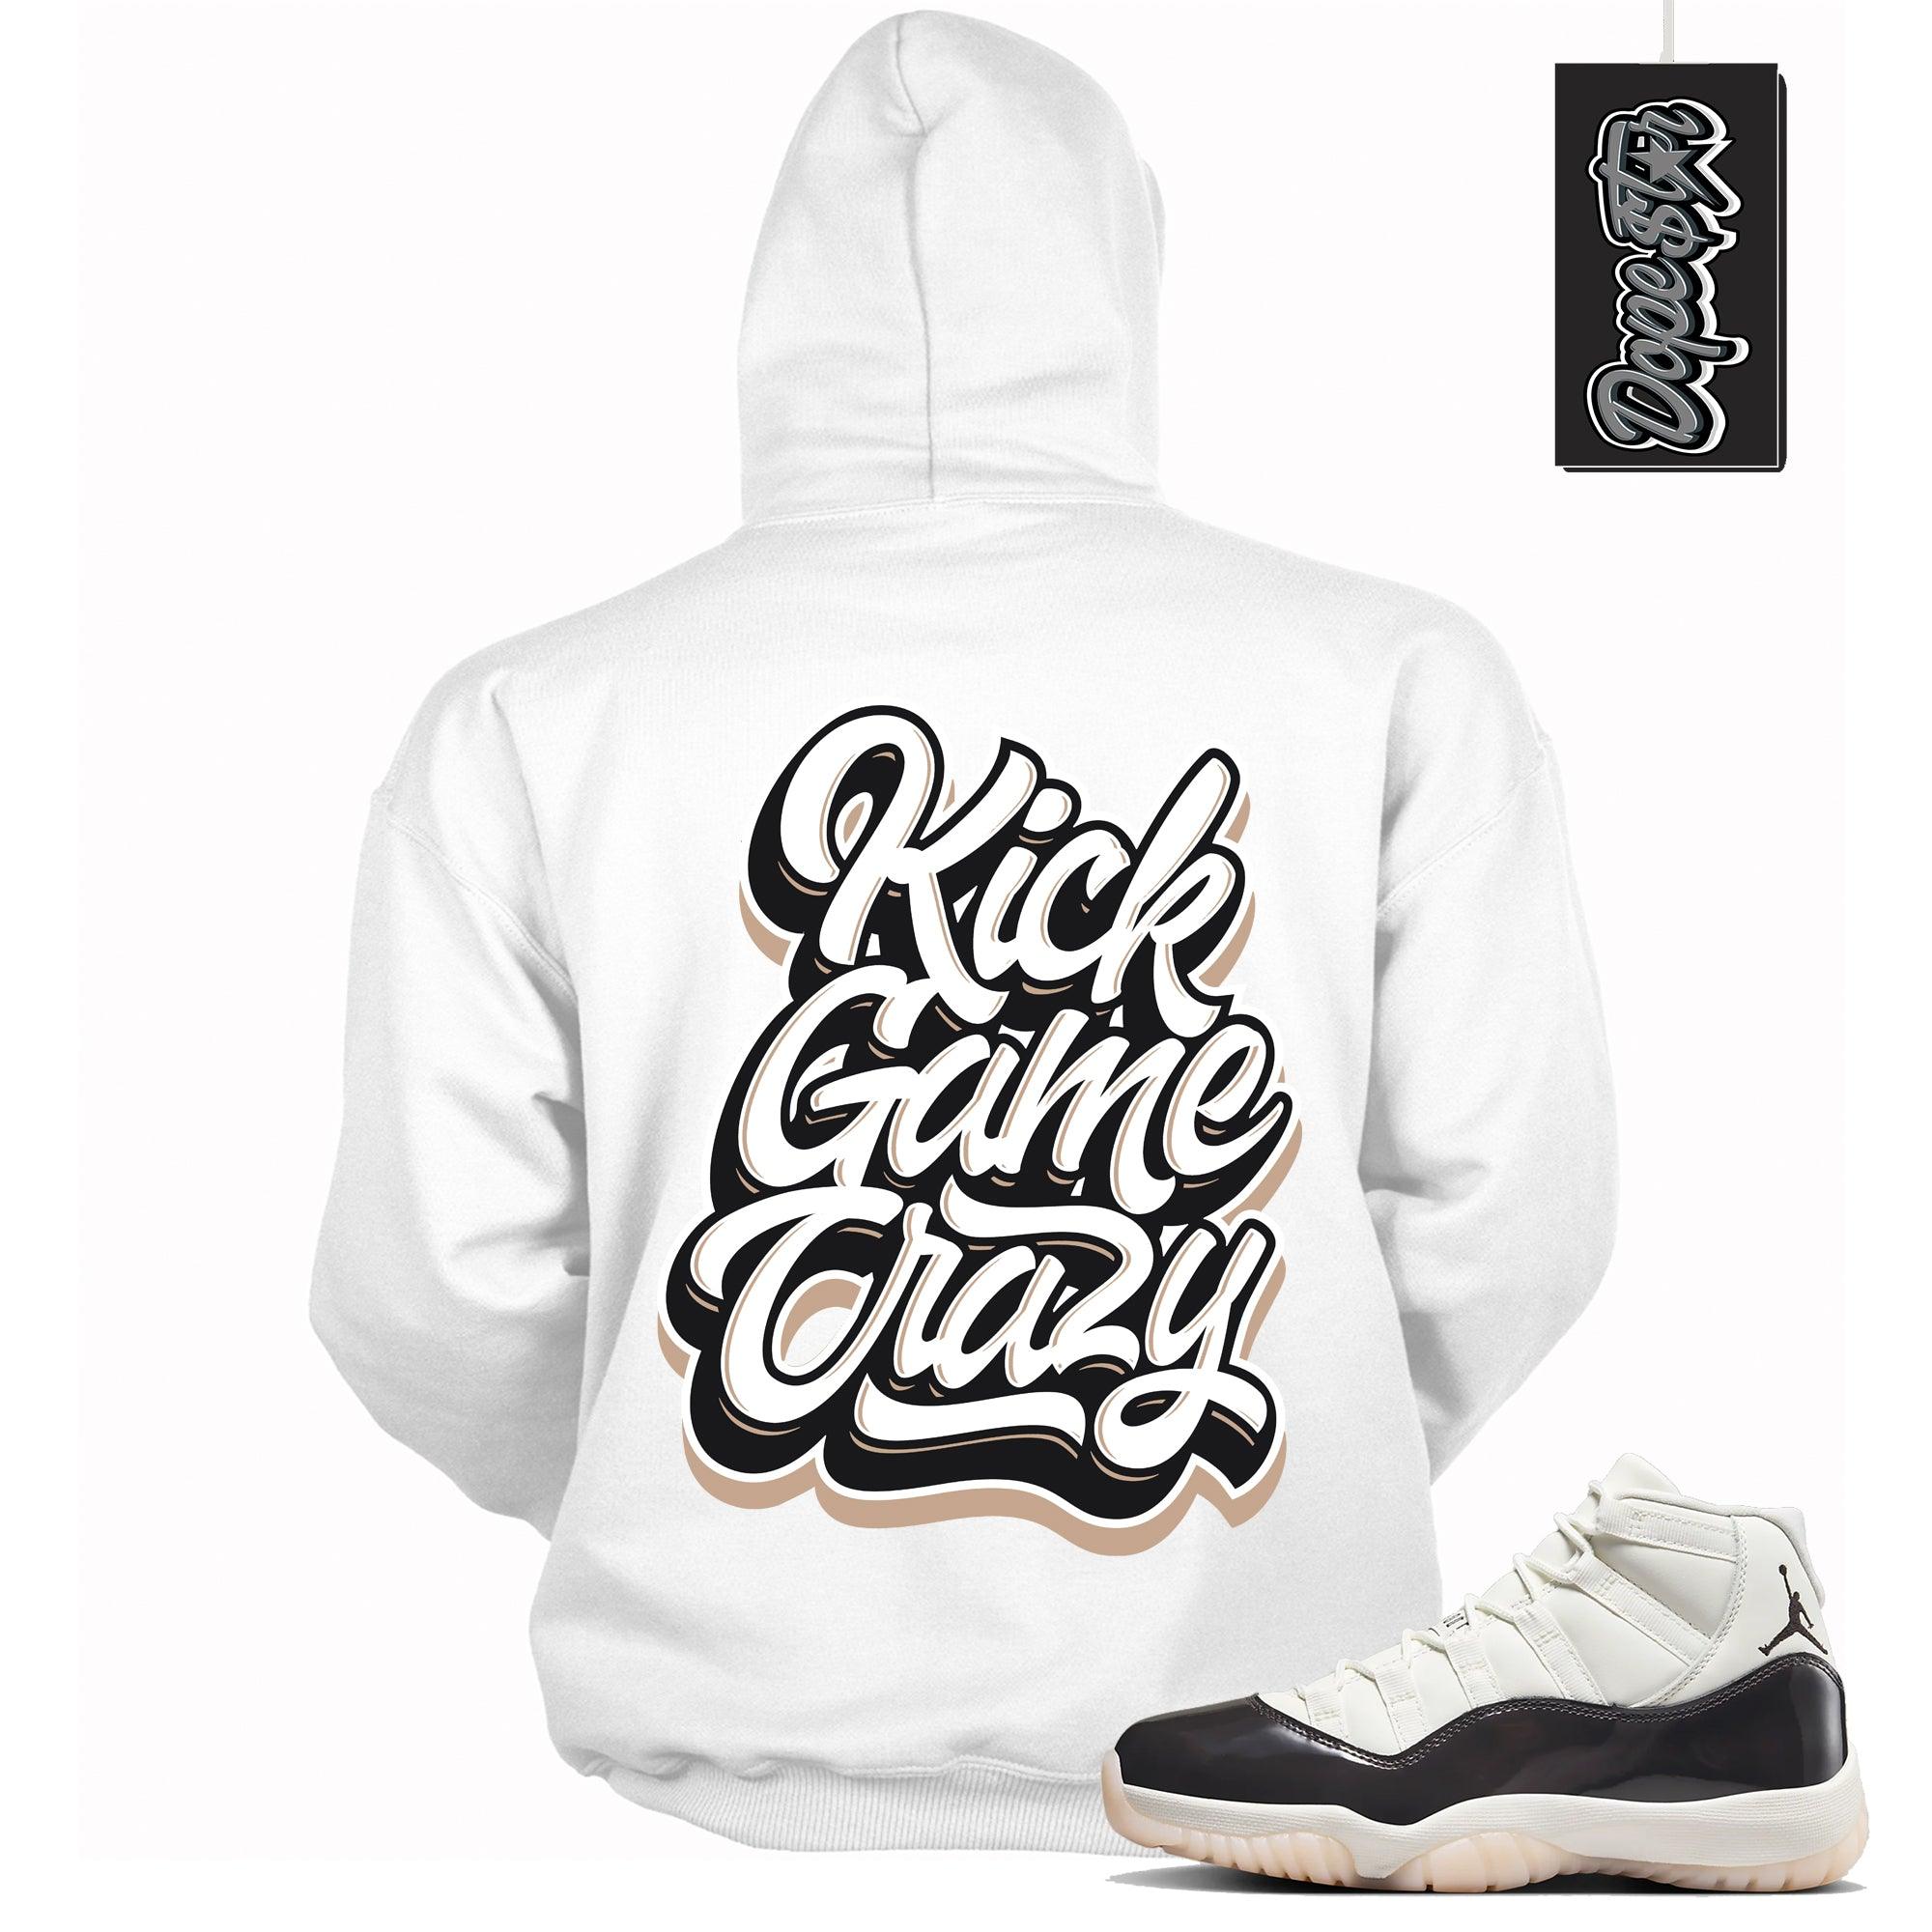 Cool White Graphic Hoodie with “ Kick Game Crazy “ print, that perfectly matches Air Jordan 11 Neapolitan sneakers